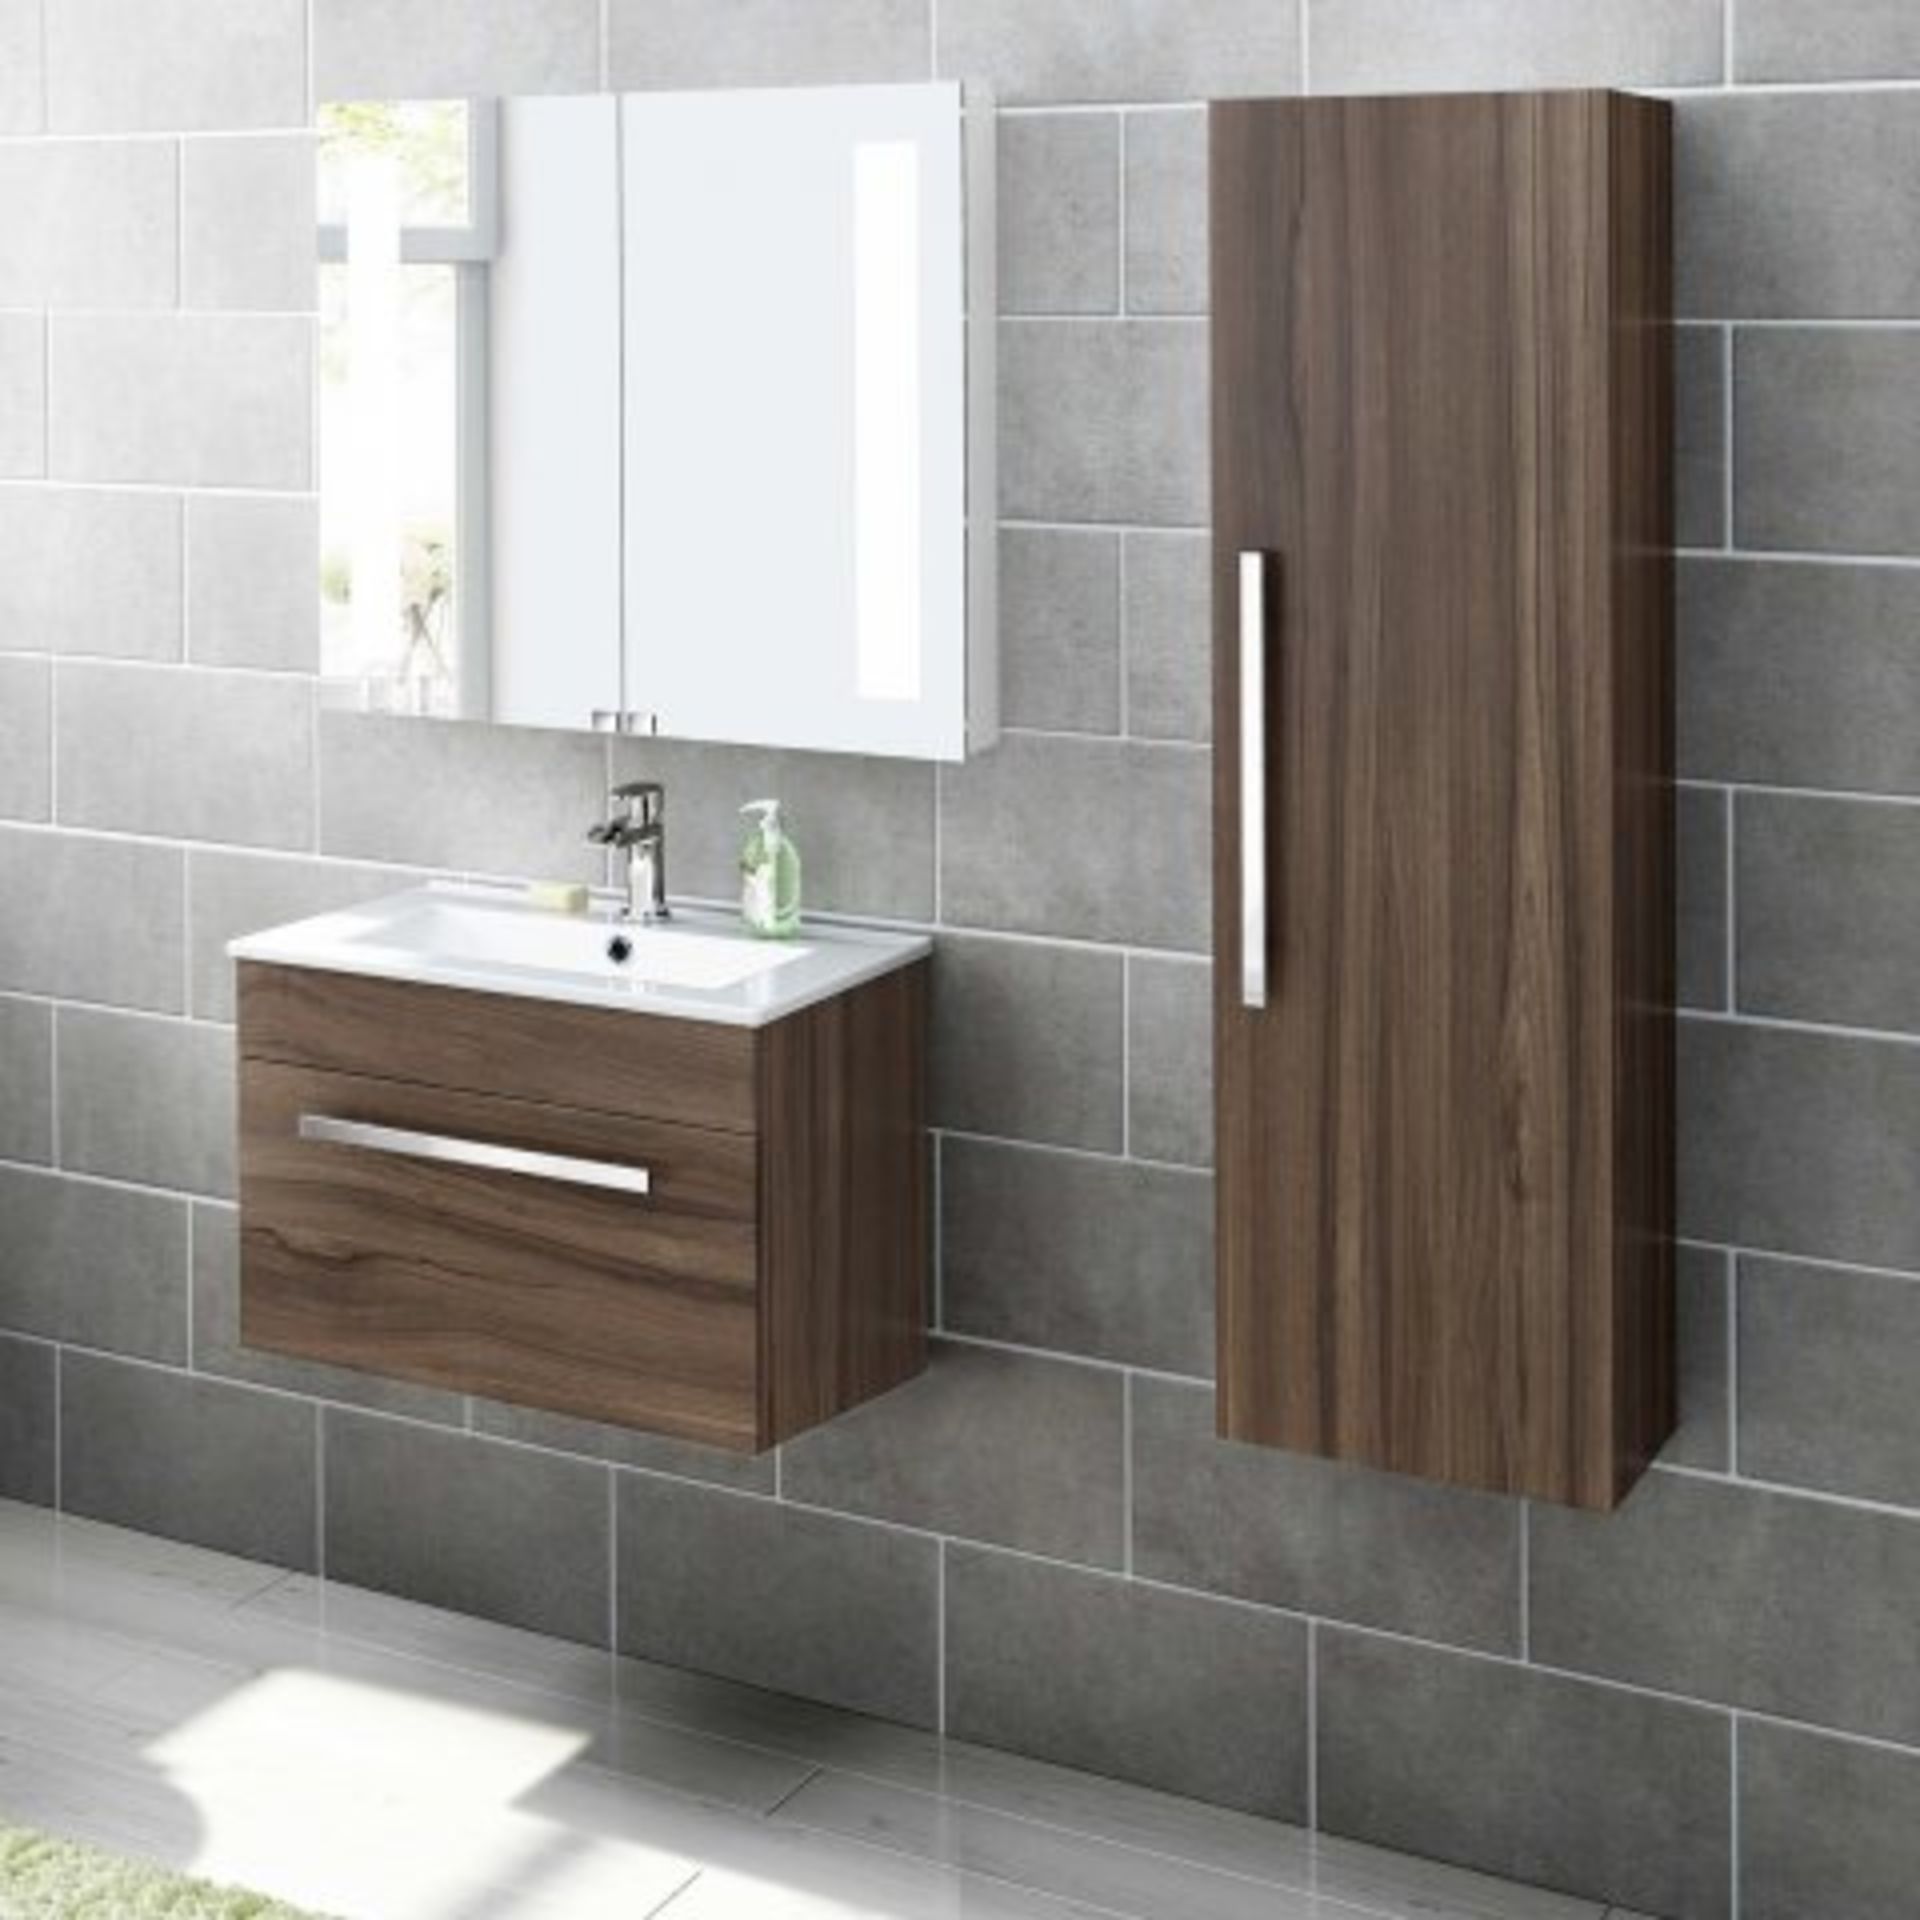 N61 - 1200mm Avon Walnut Effect Tall Storage Cabinet - Wall Hung. RRP £274.99. If space saving is - Image 3 of 3